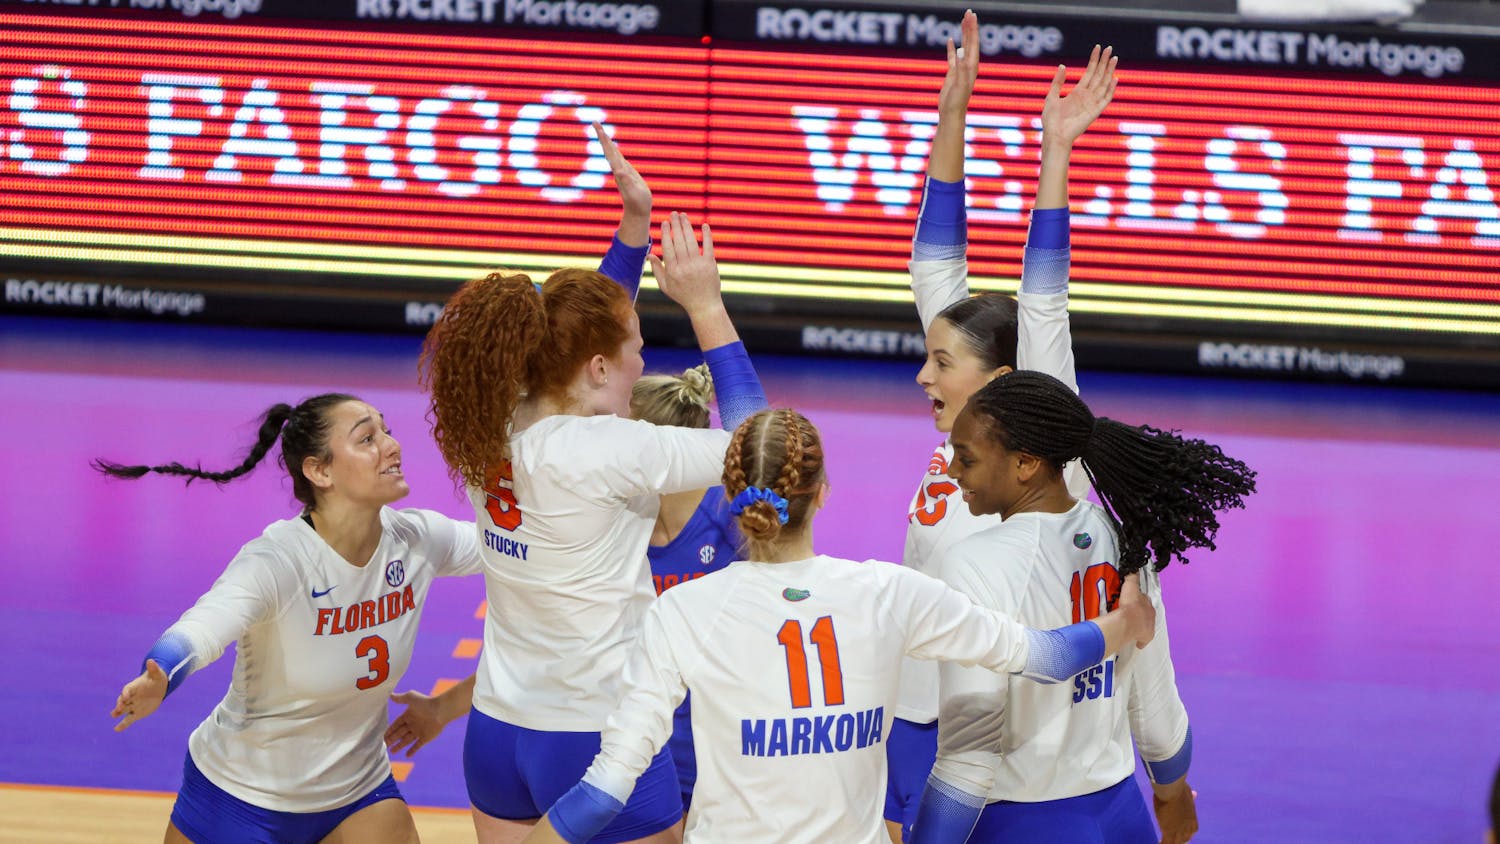 The Florida volleyball team celebrates a point during its match against LSU Sunday Oct. 9, 2022.  